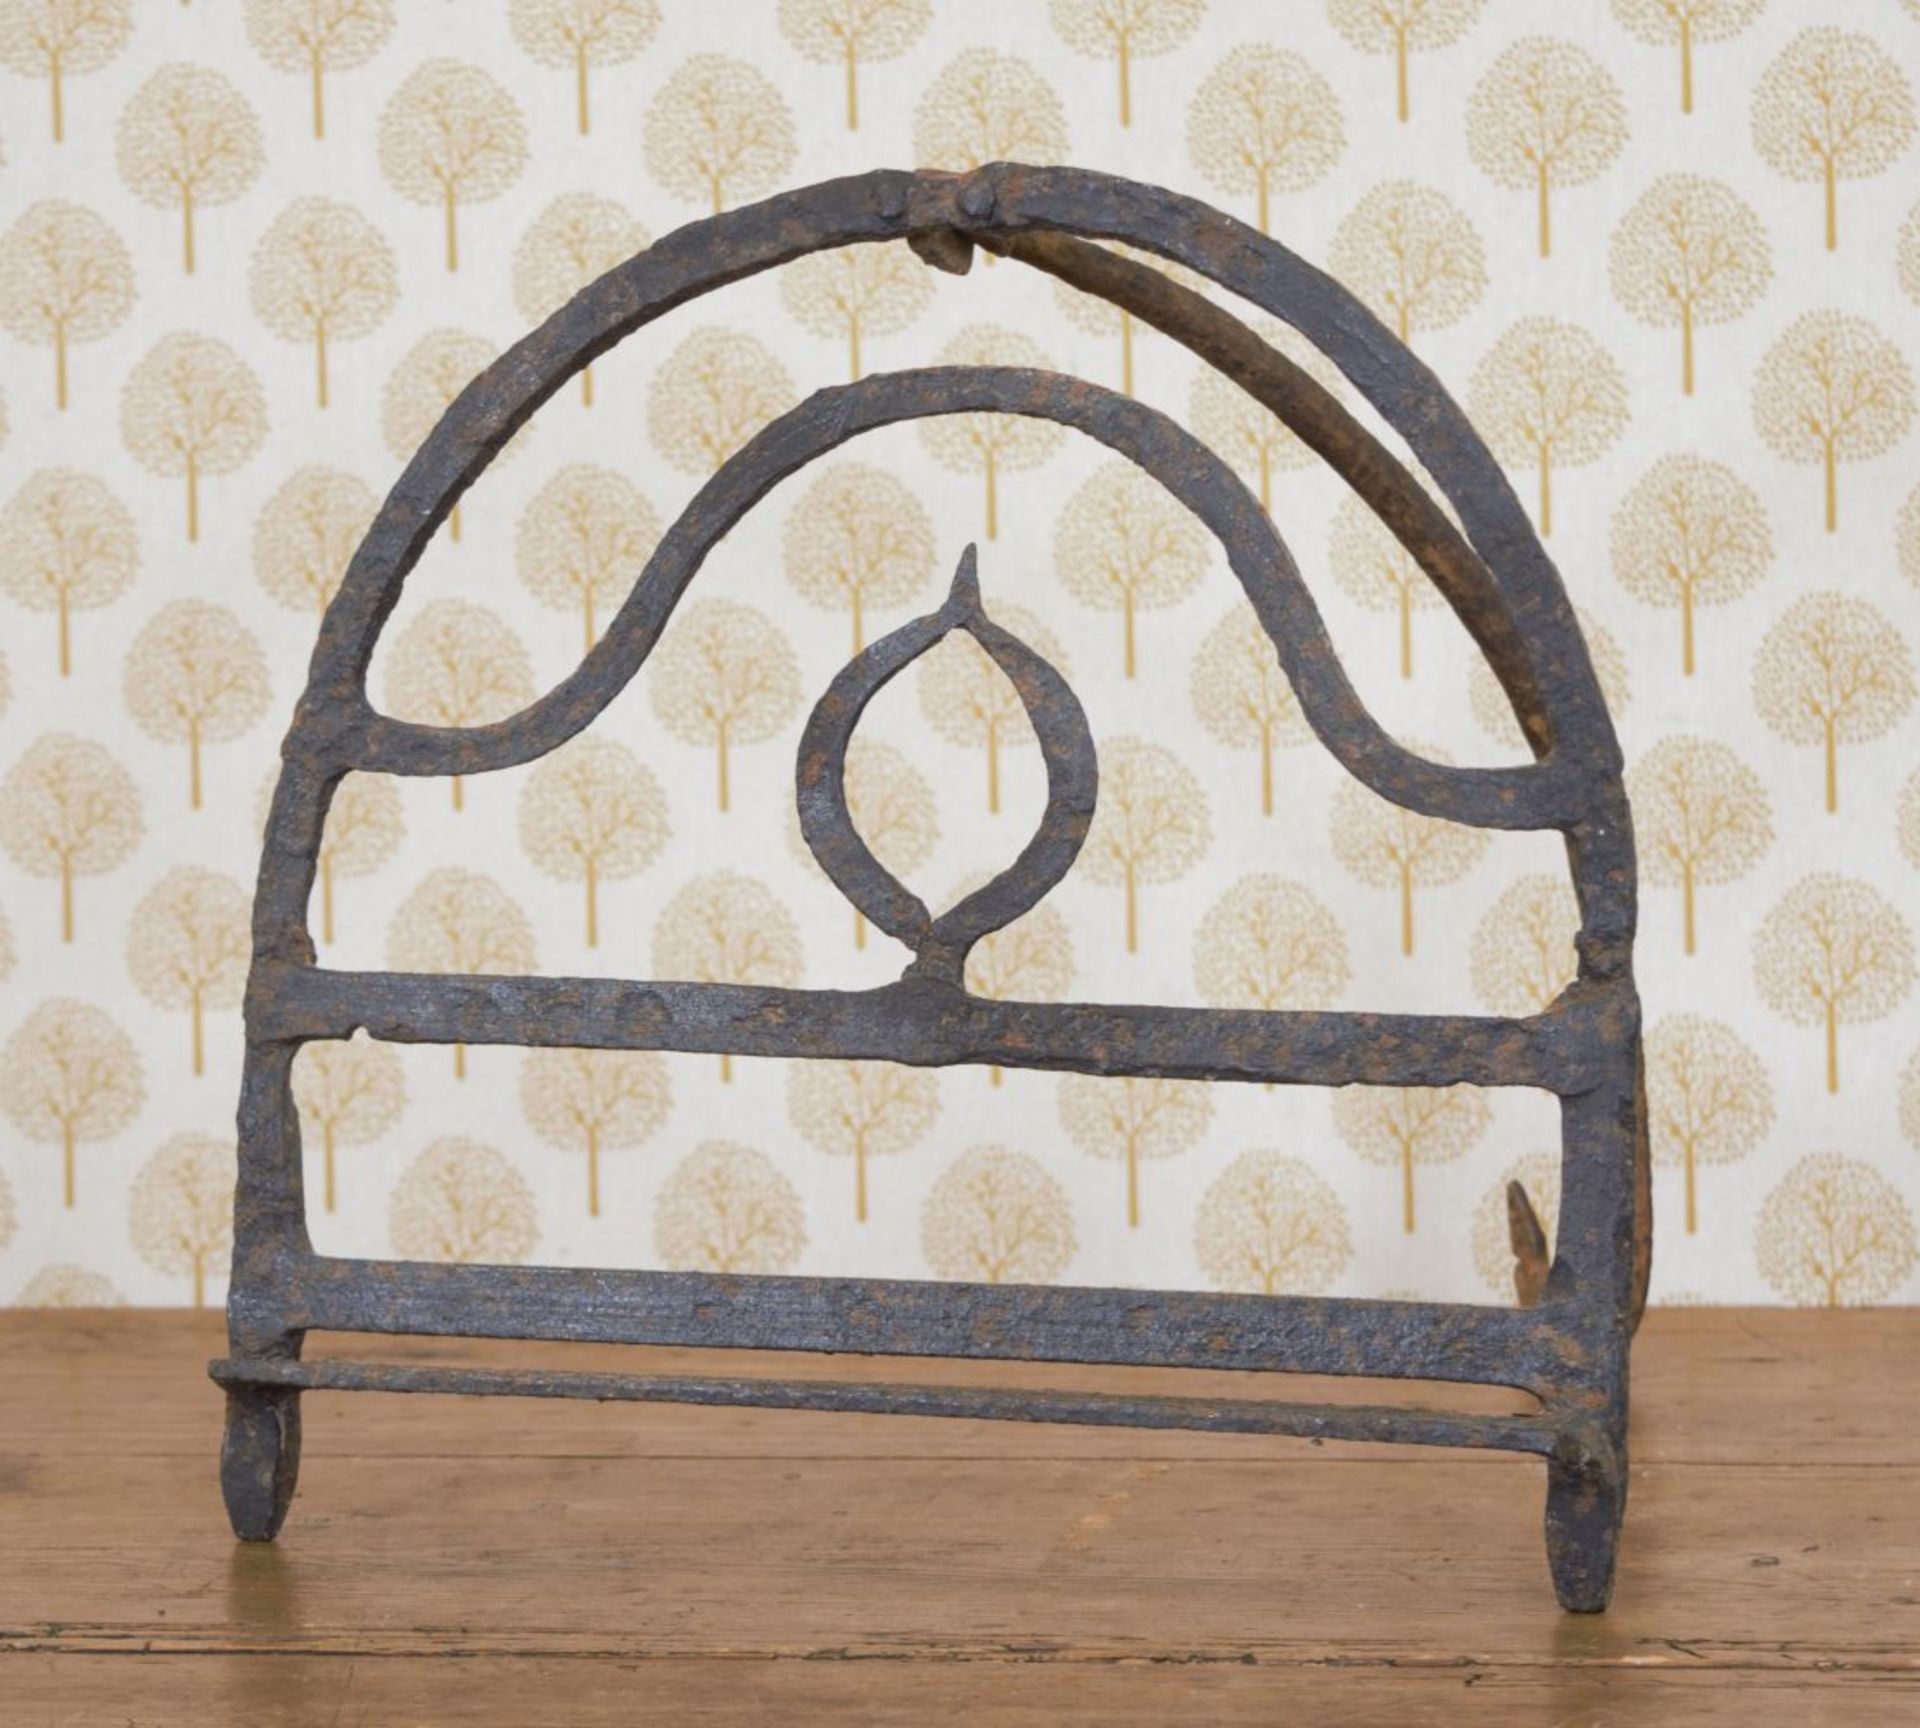 EARLY 19TH-CENTURY FORGED IRON BREAD HARDENING STAND - Image 3 of 3